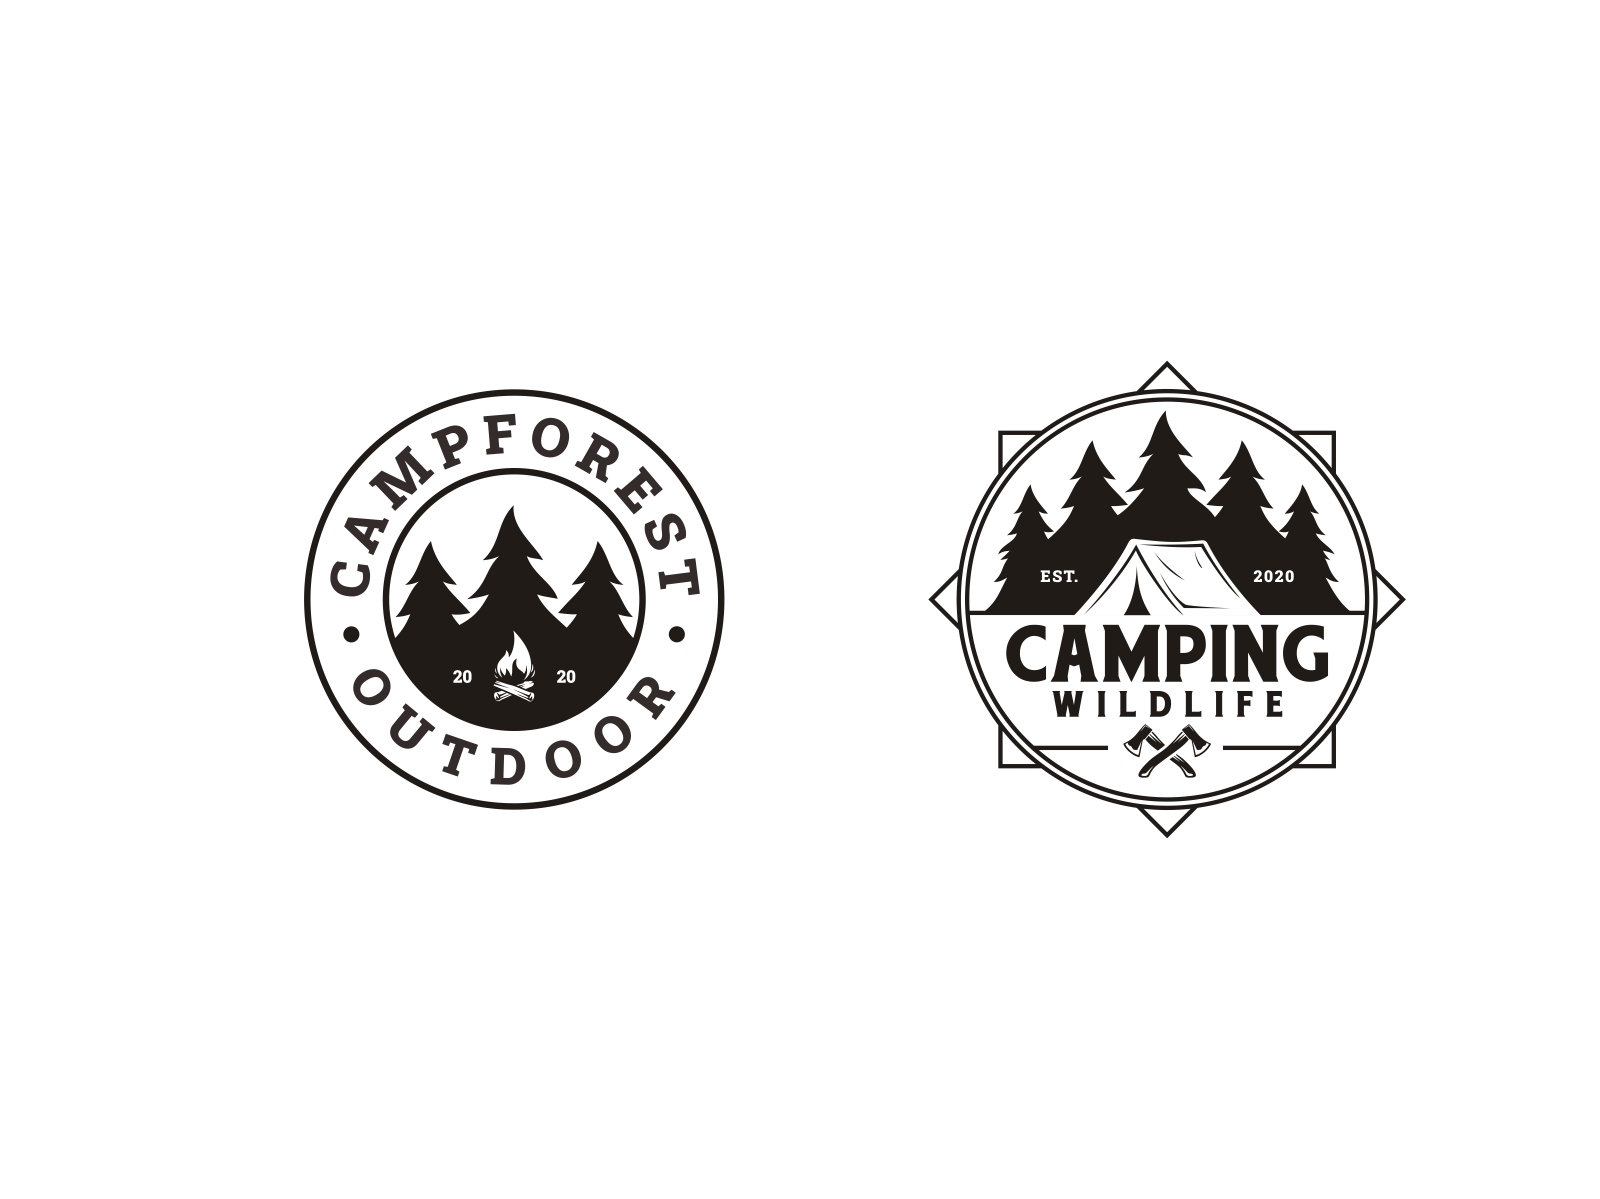 Camping outdoor by Weasley99 on Dribbble